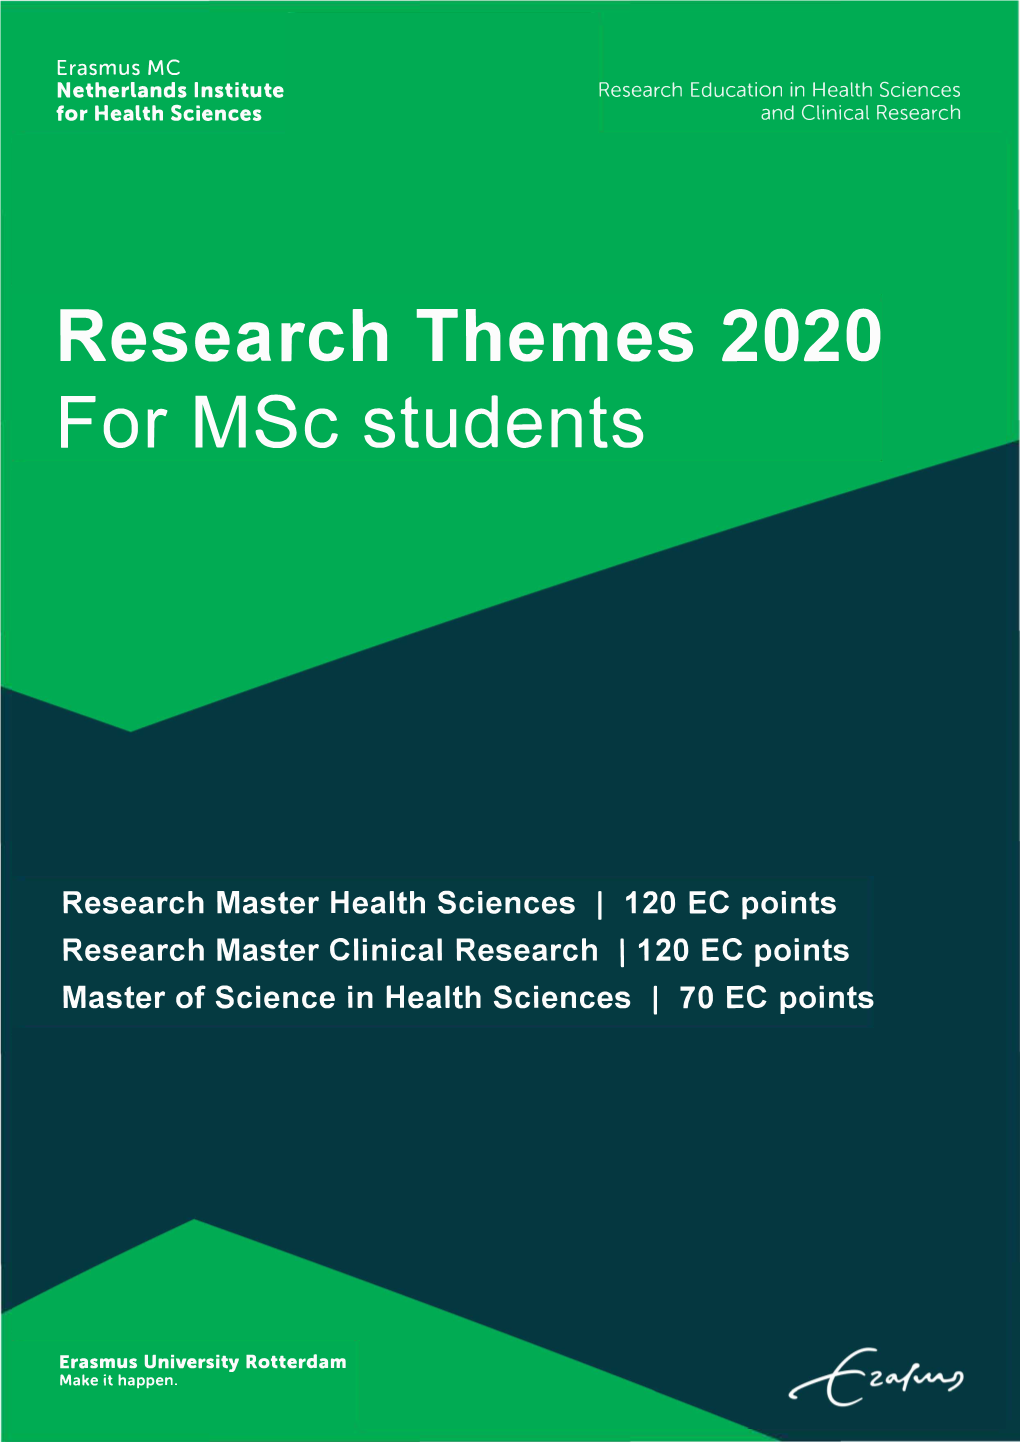 Research Themes Guide 2020